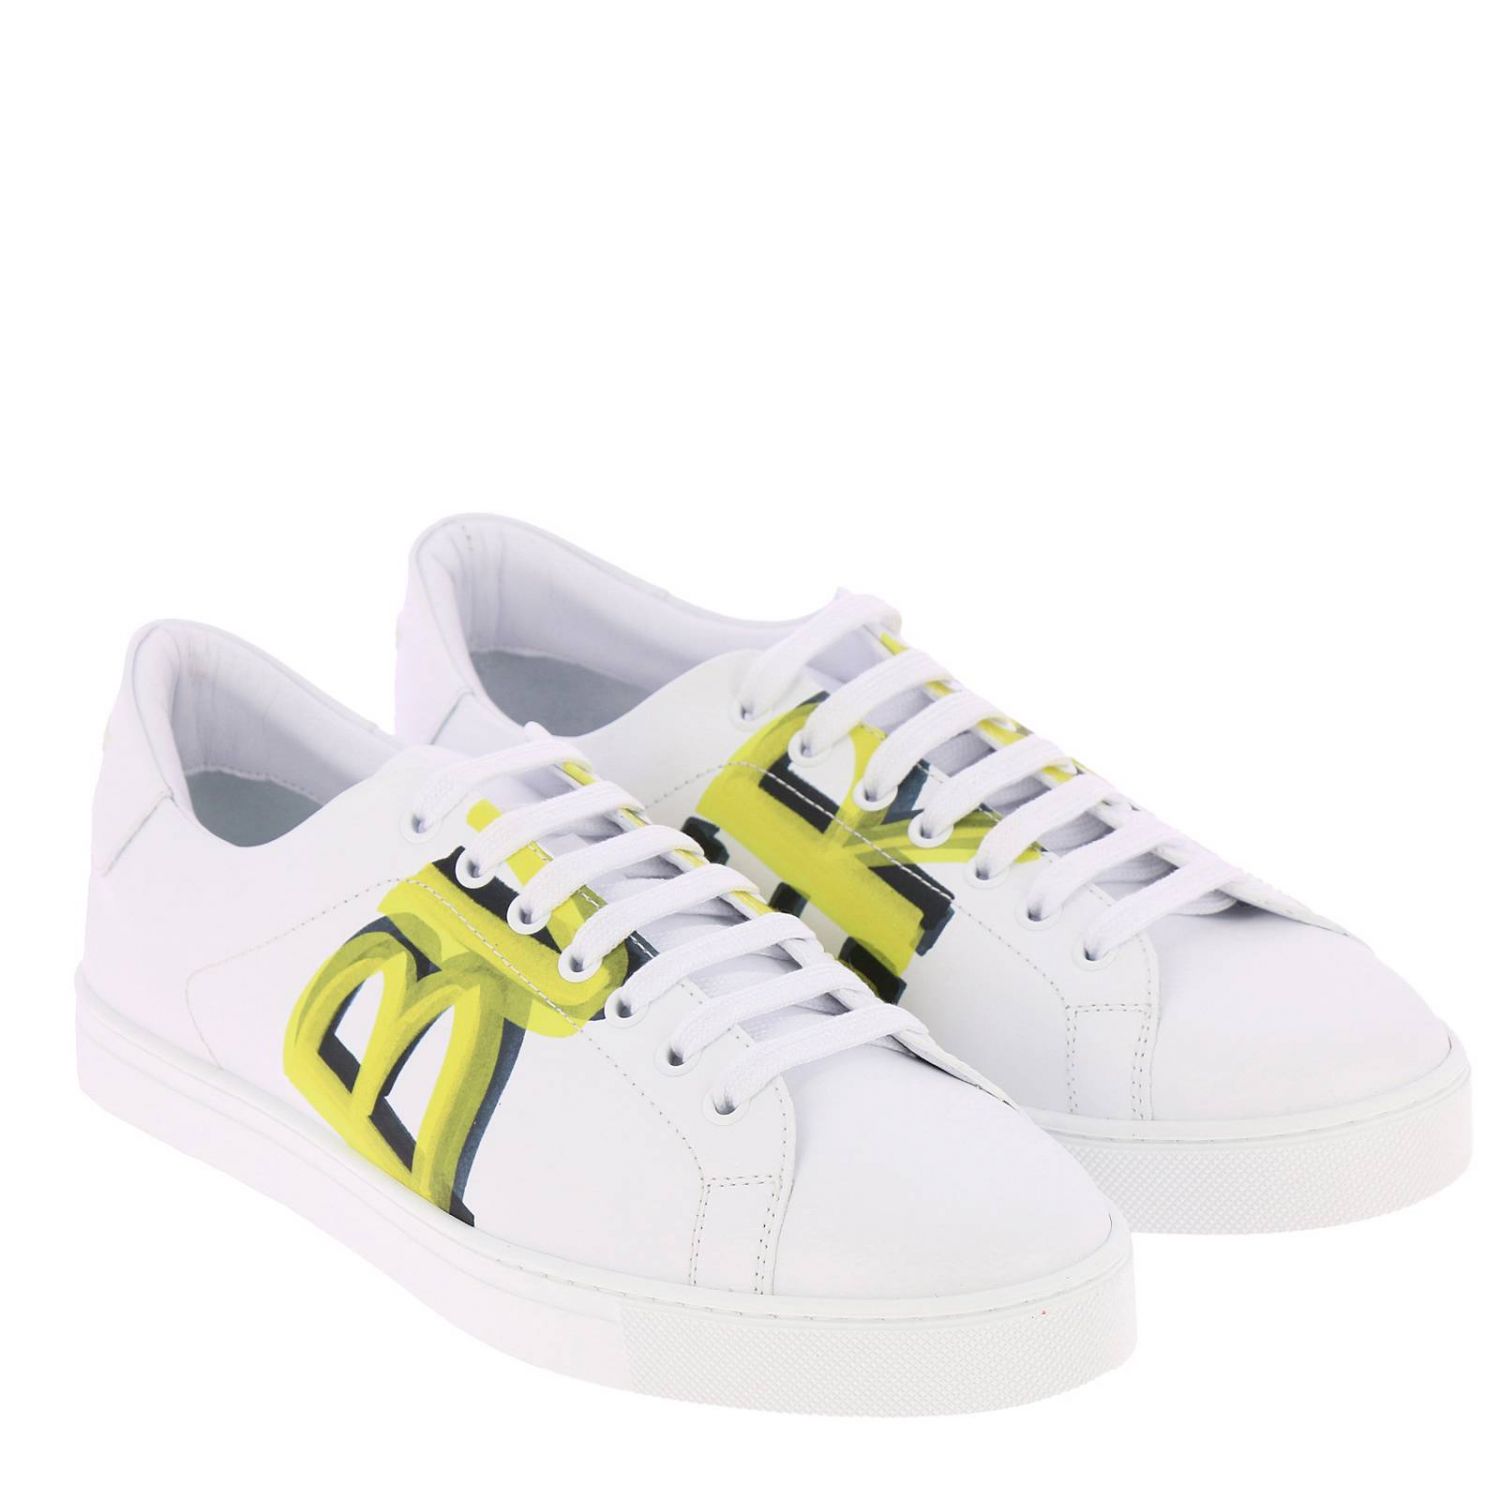 Shoes men Burberry | Sneakers Burberry Men White | Sneakers Burberry